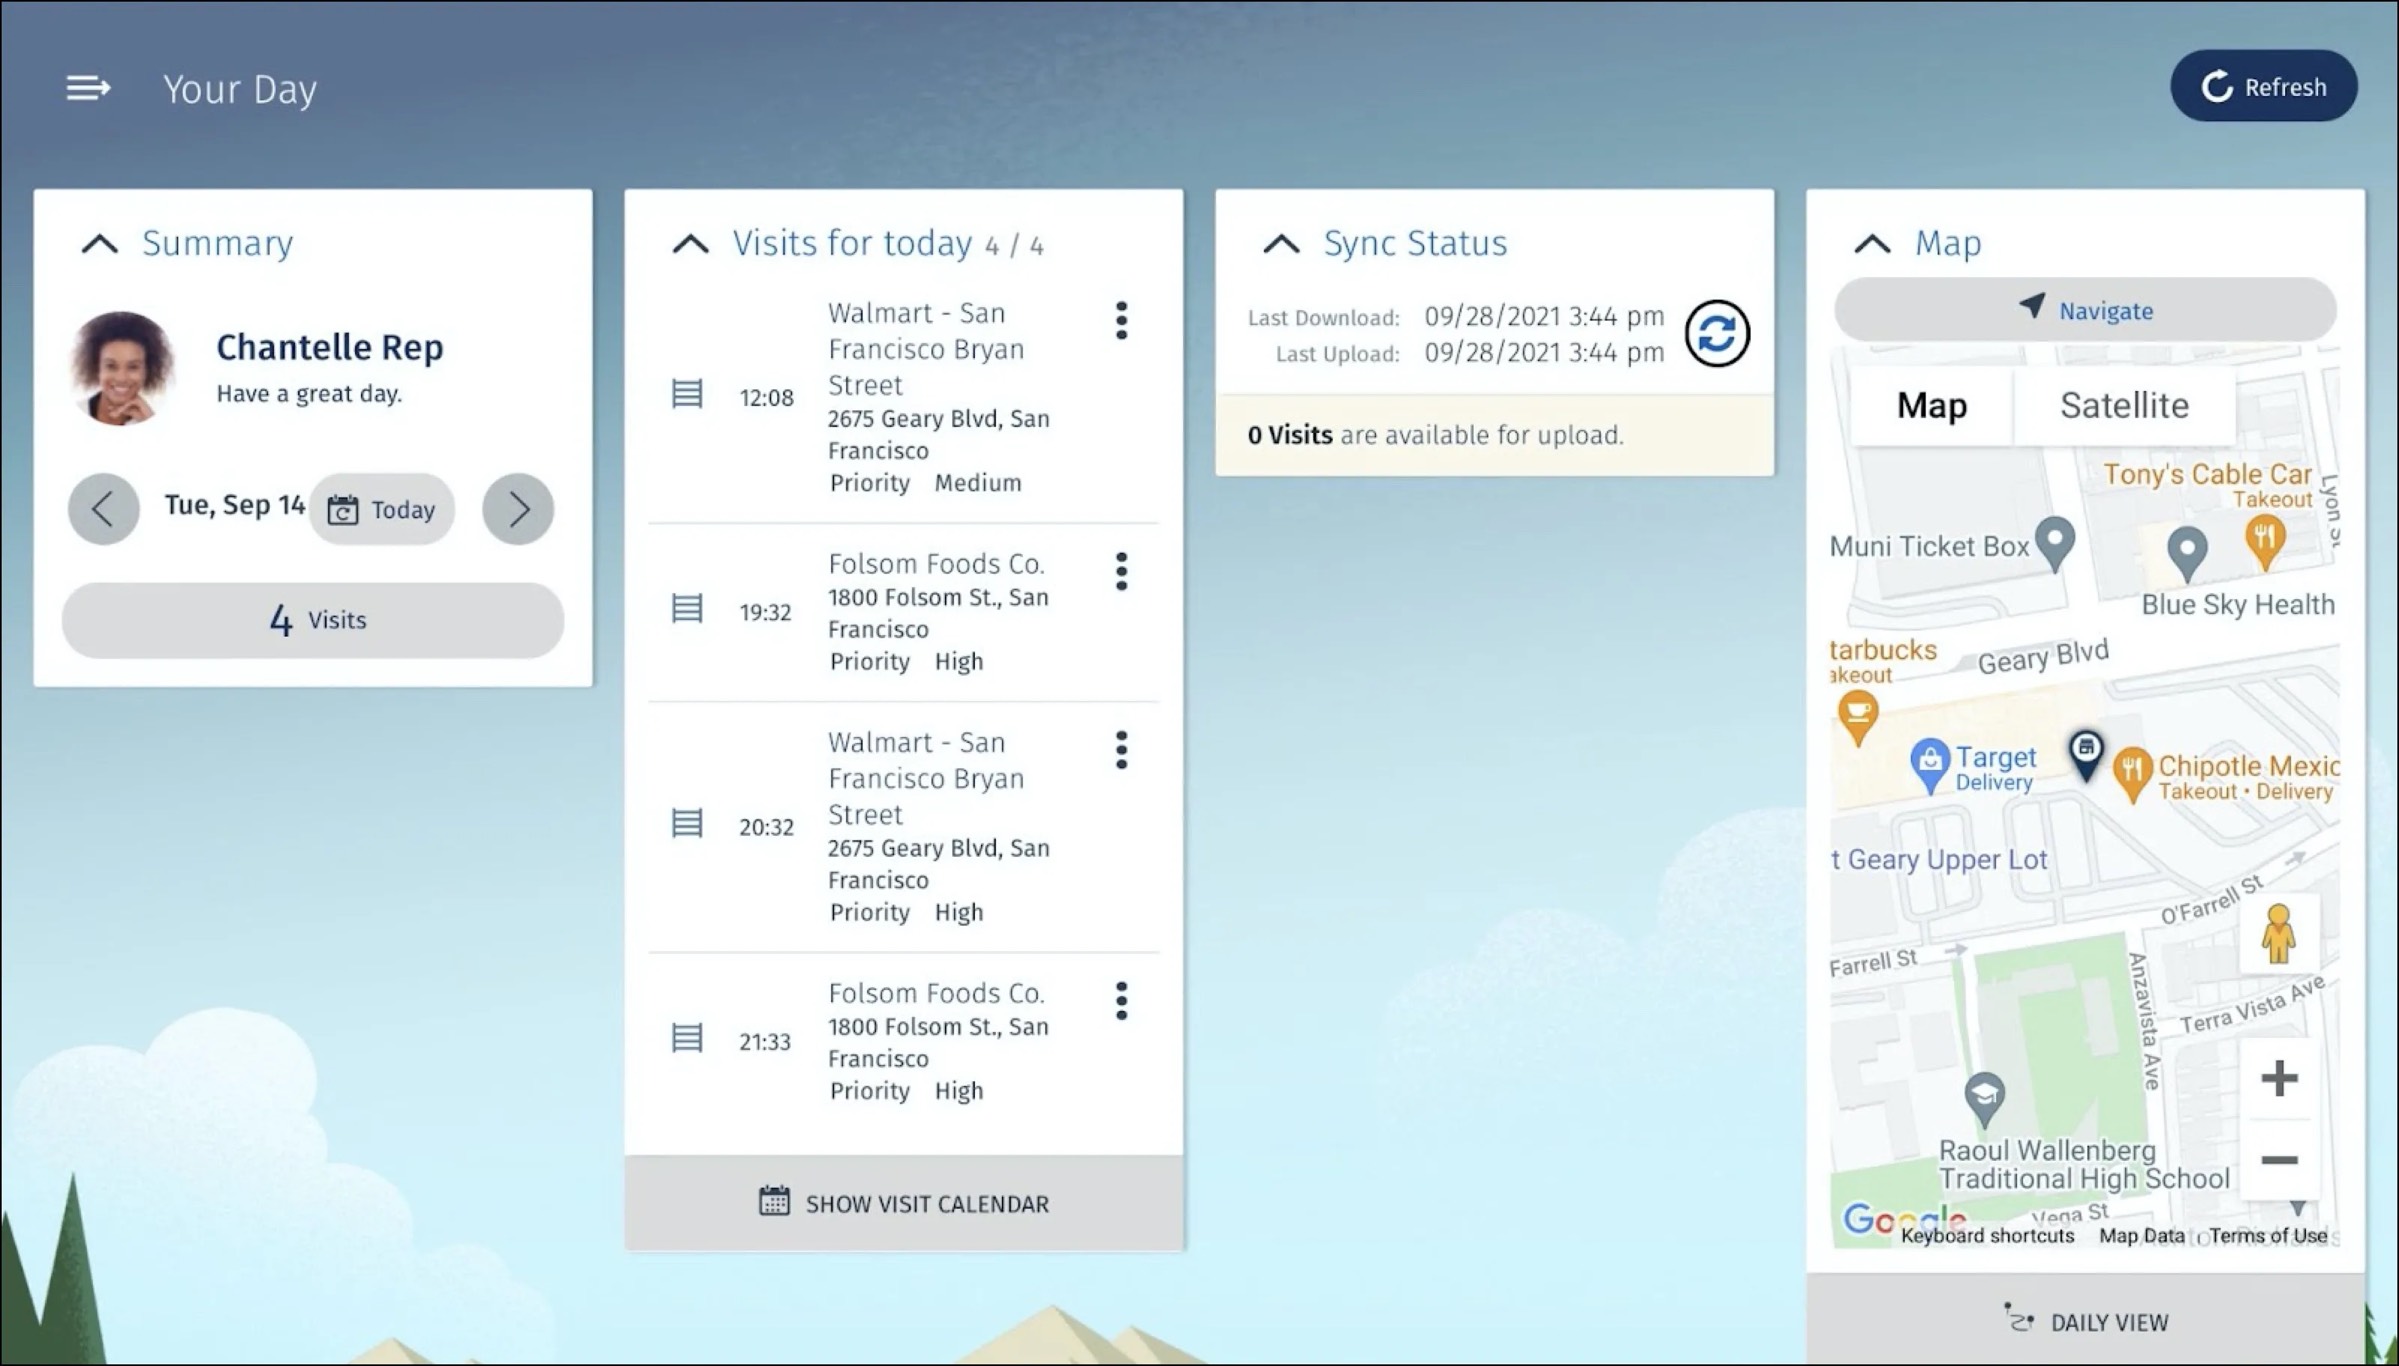 Salesforce Retail Execution Cockpit UI provides a 360 view of a store and visit-related information with live, in store reporting